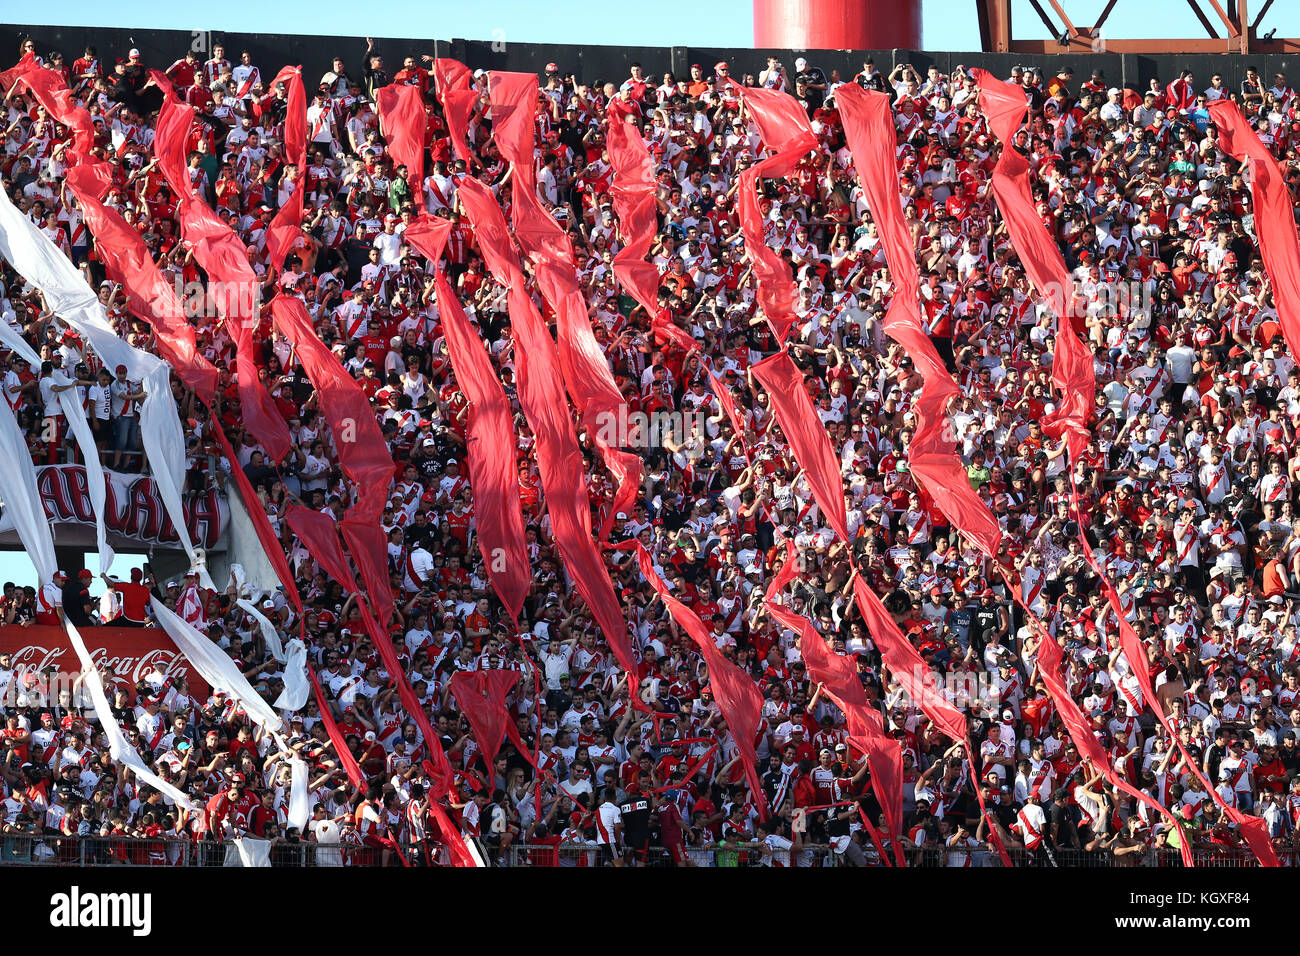 MONUMENTAL STADIUM, BUENOS AIRES, ARGENTINA - NOVEMBER 2017 - River plate football team fans celebrating before the match starts Stock Photo